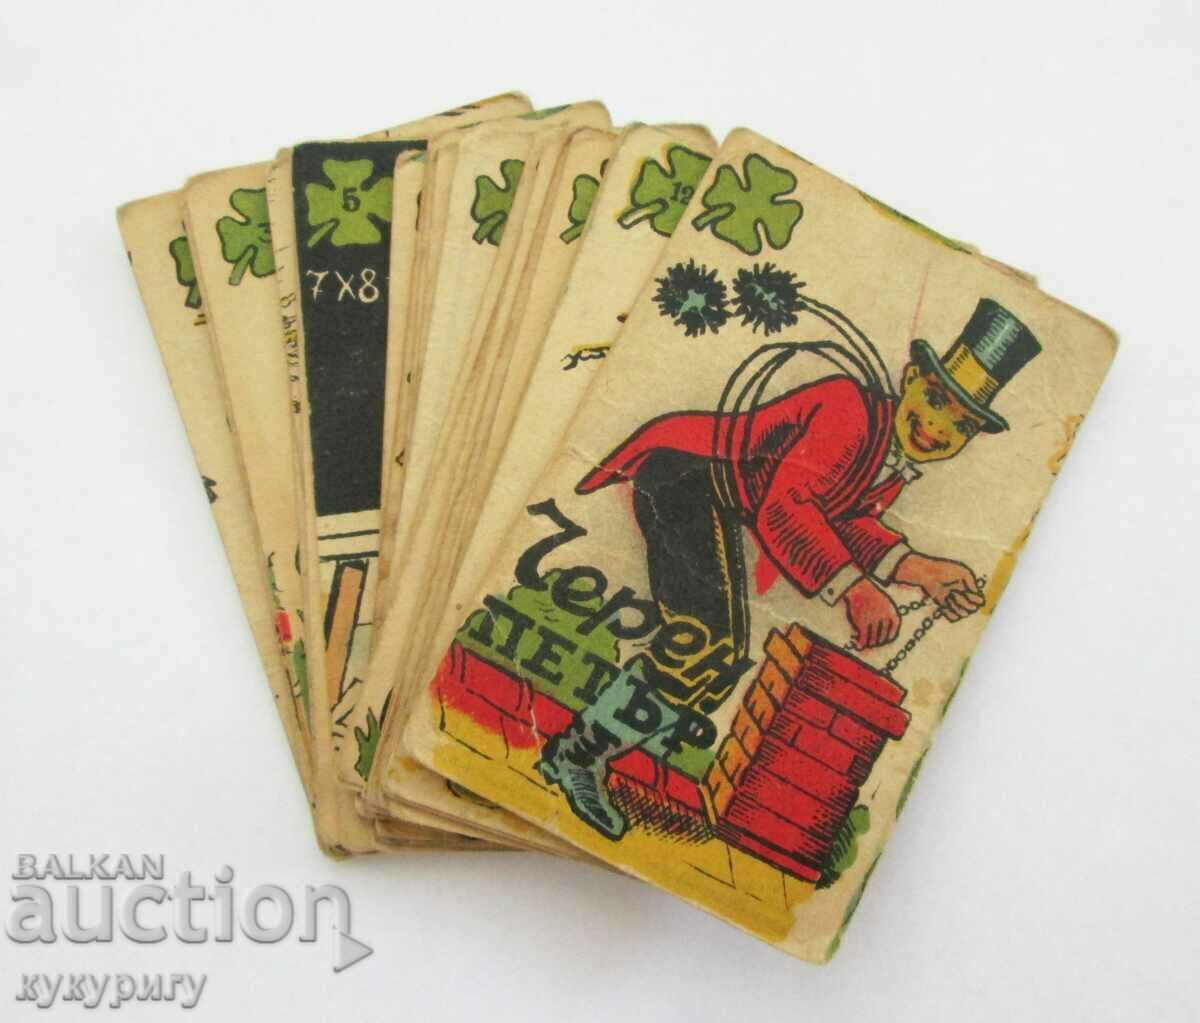 Pretty old Black Peter playing cards